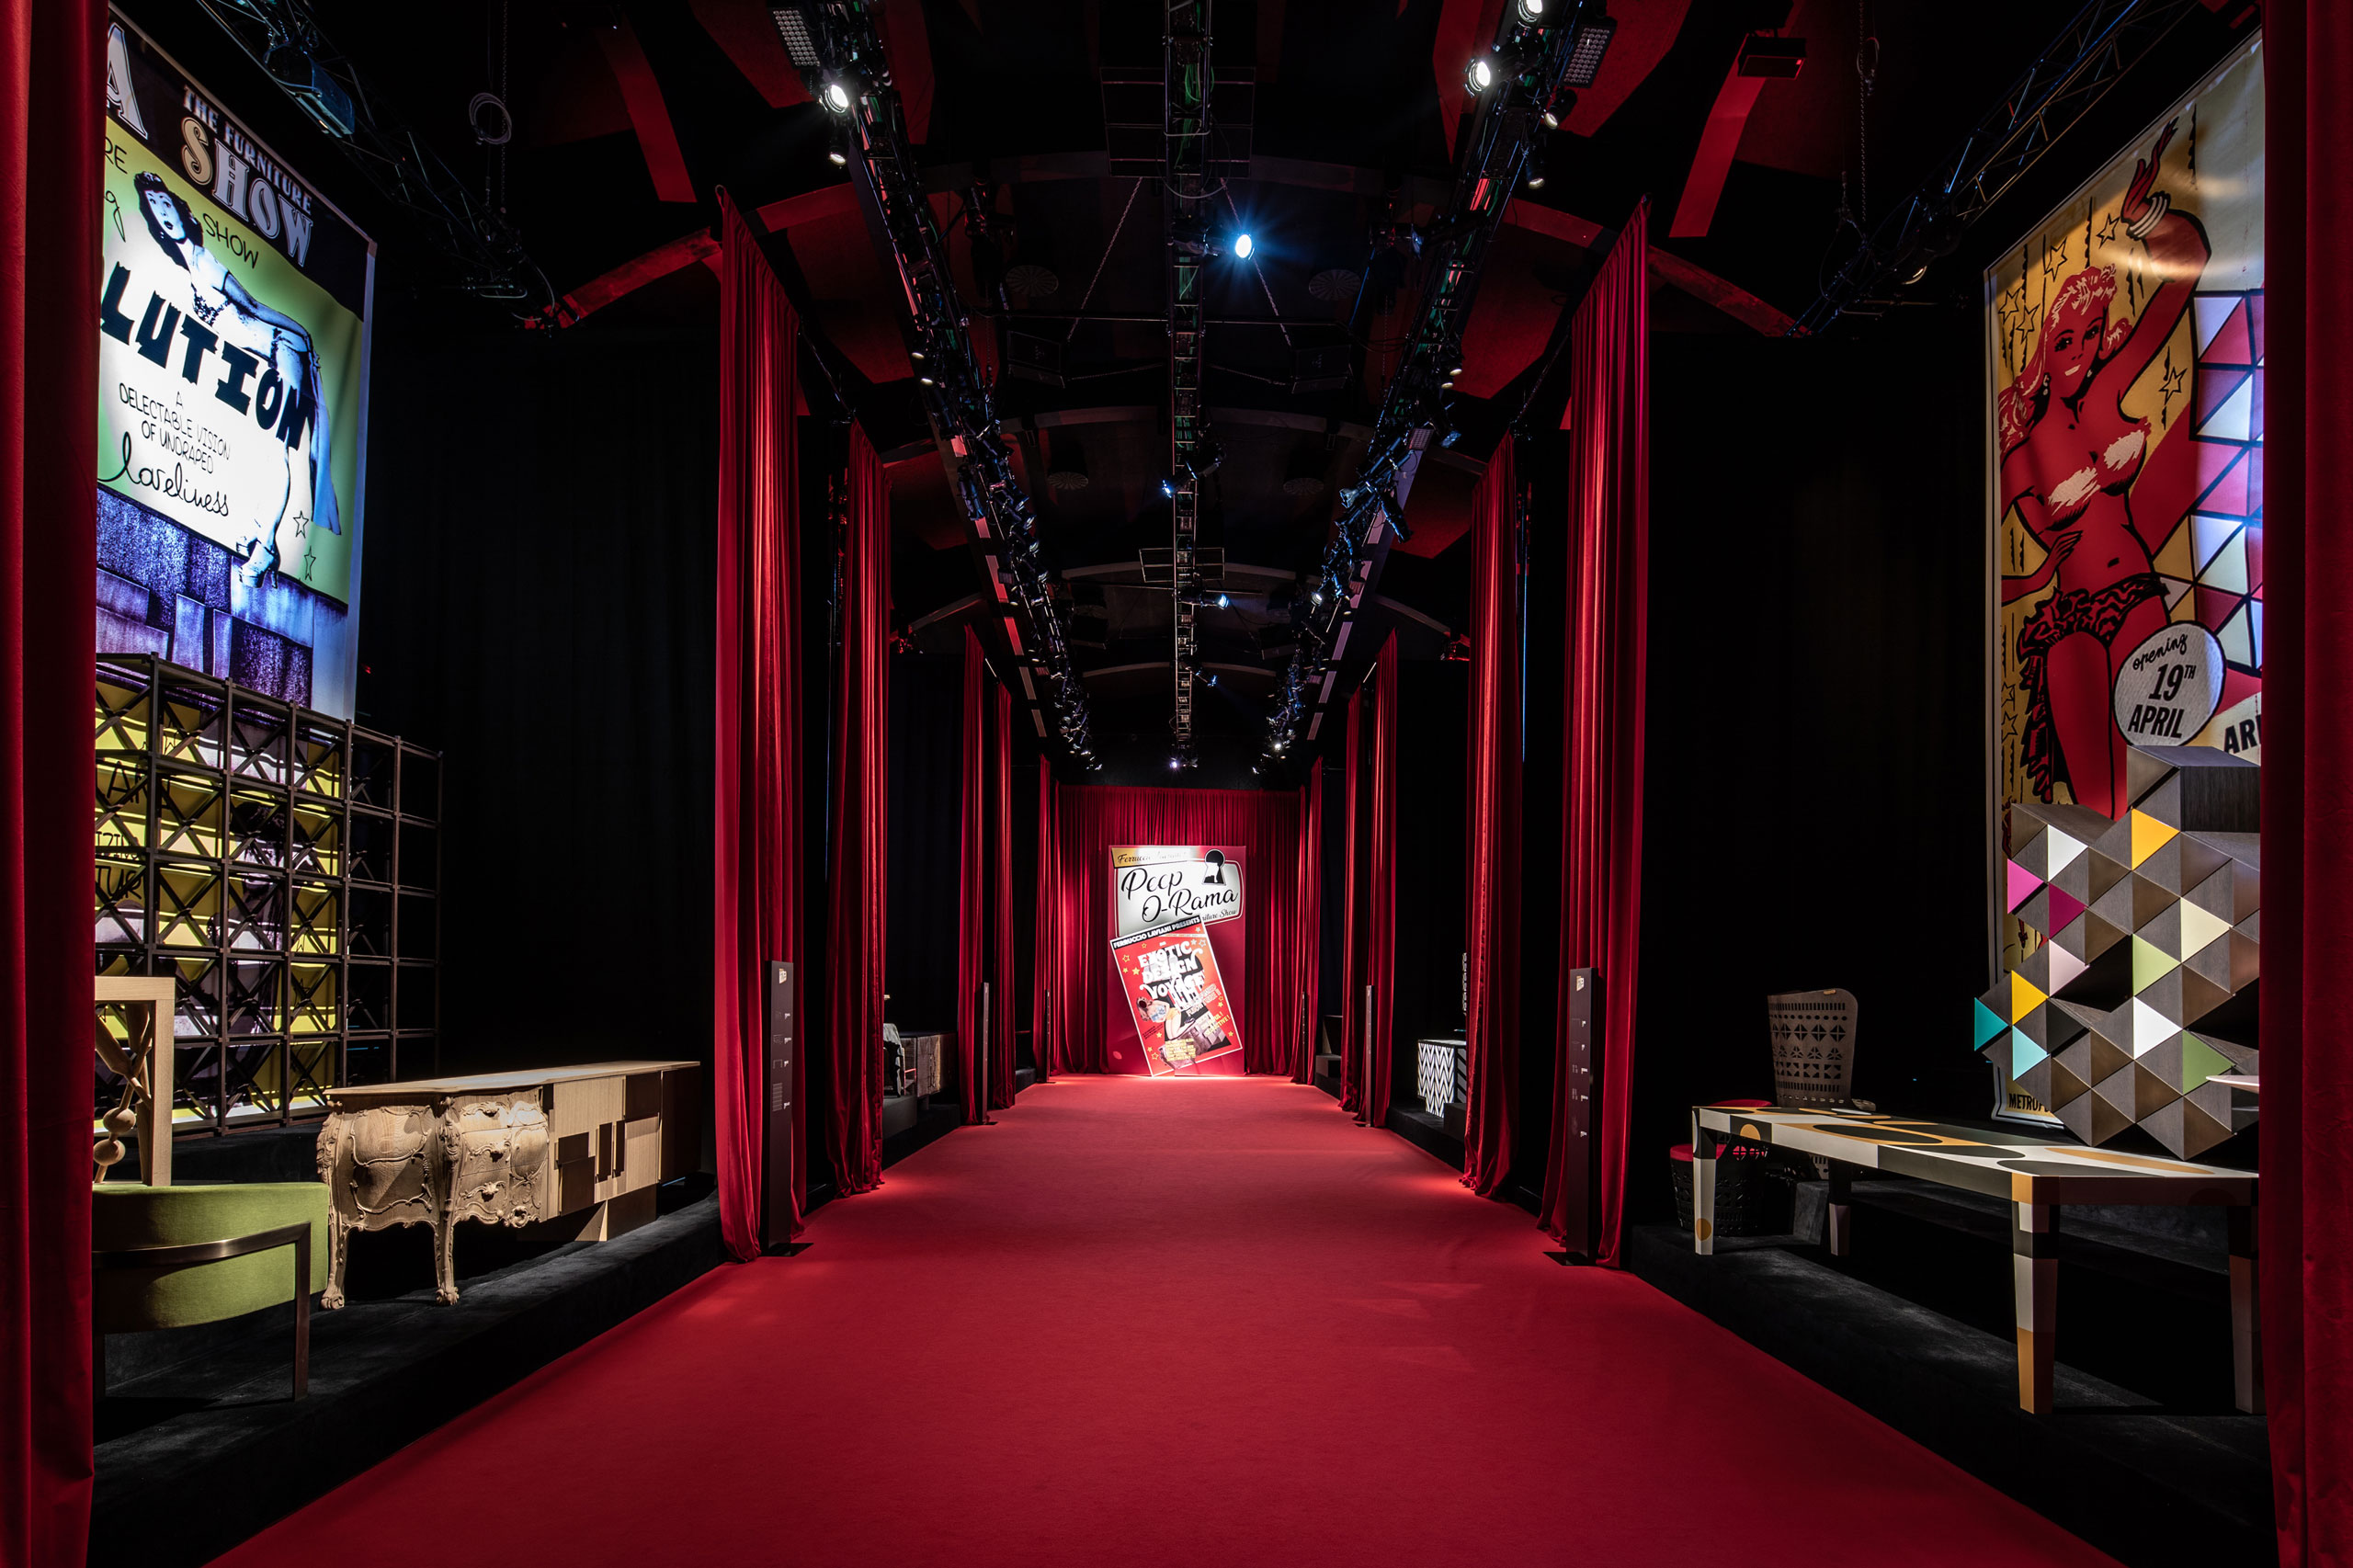 PEEP O-RAMA, The Furniture Show at the Dolce&amp;Gabbana Metropol theatre. An Overview of Ferruccio Laviani’s Furniture Collection for Emmemobili.Photo by Gianluca Vassallo.